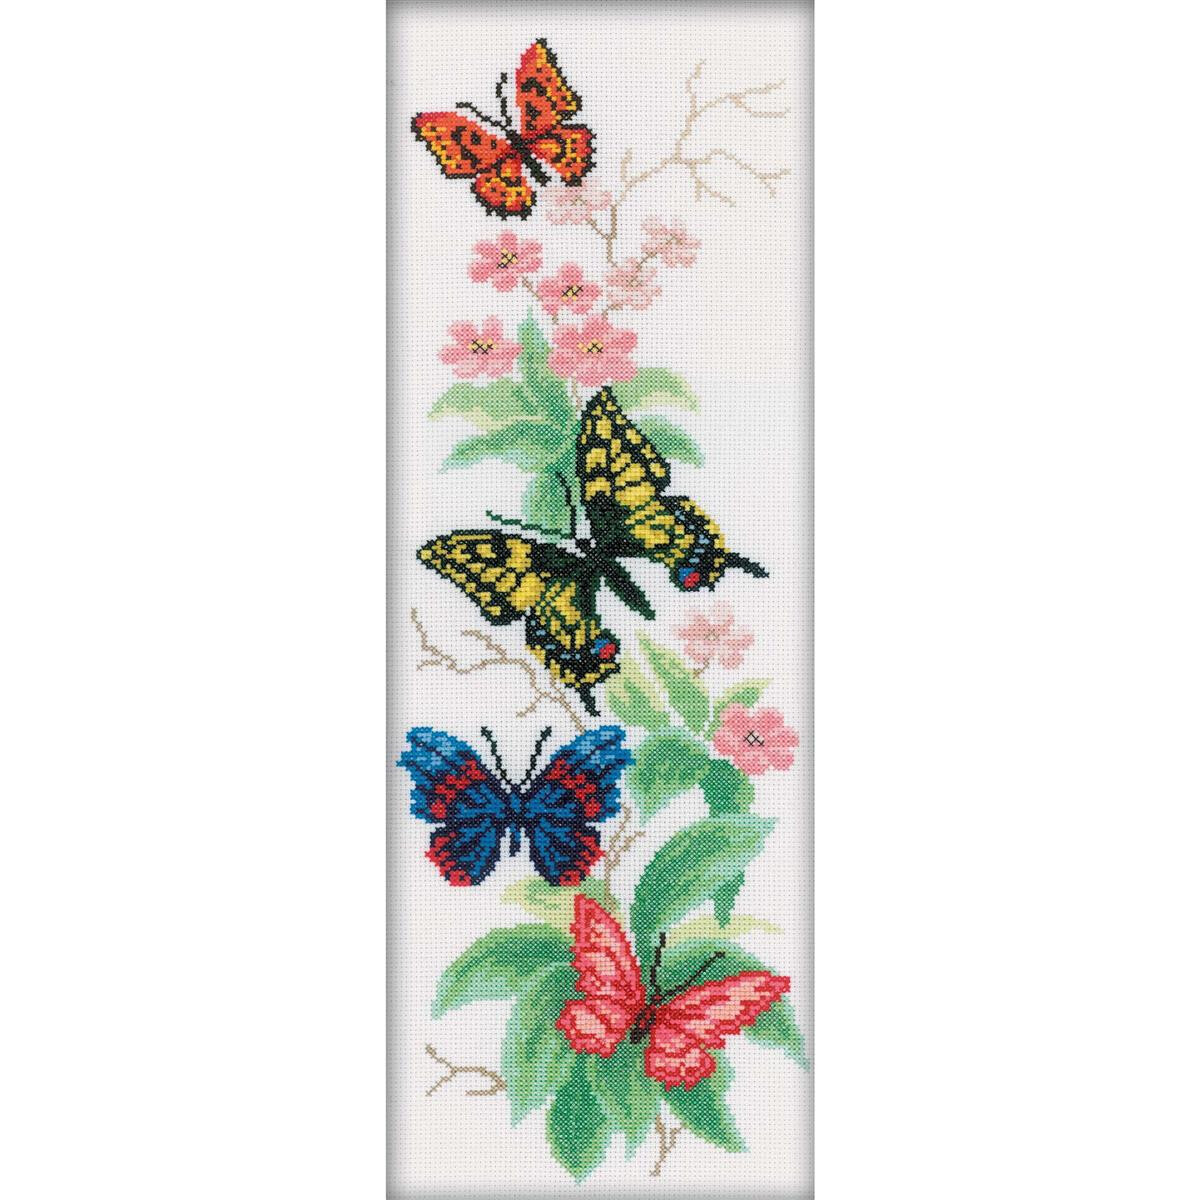 RTO counted Cross Stitch Kit "Butterflies And...